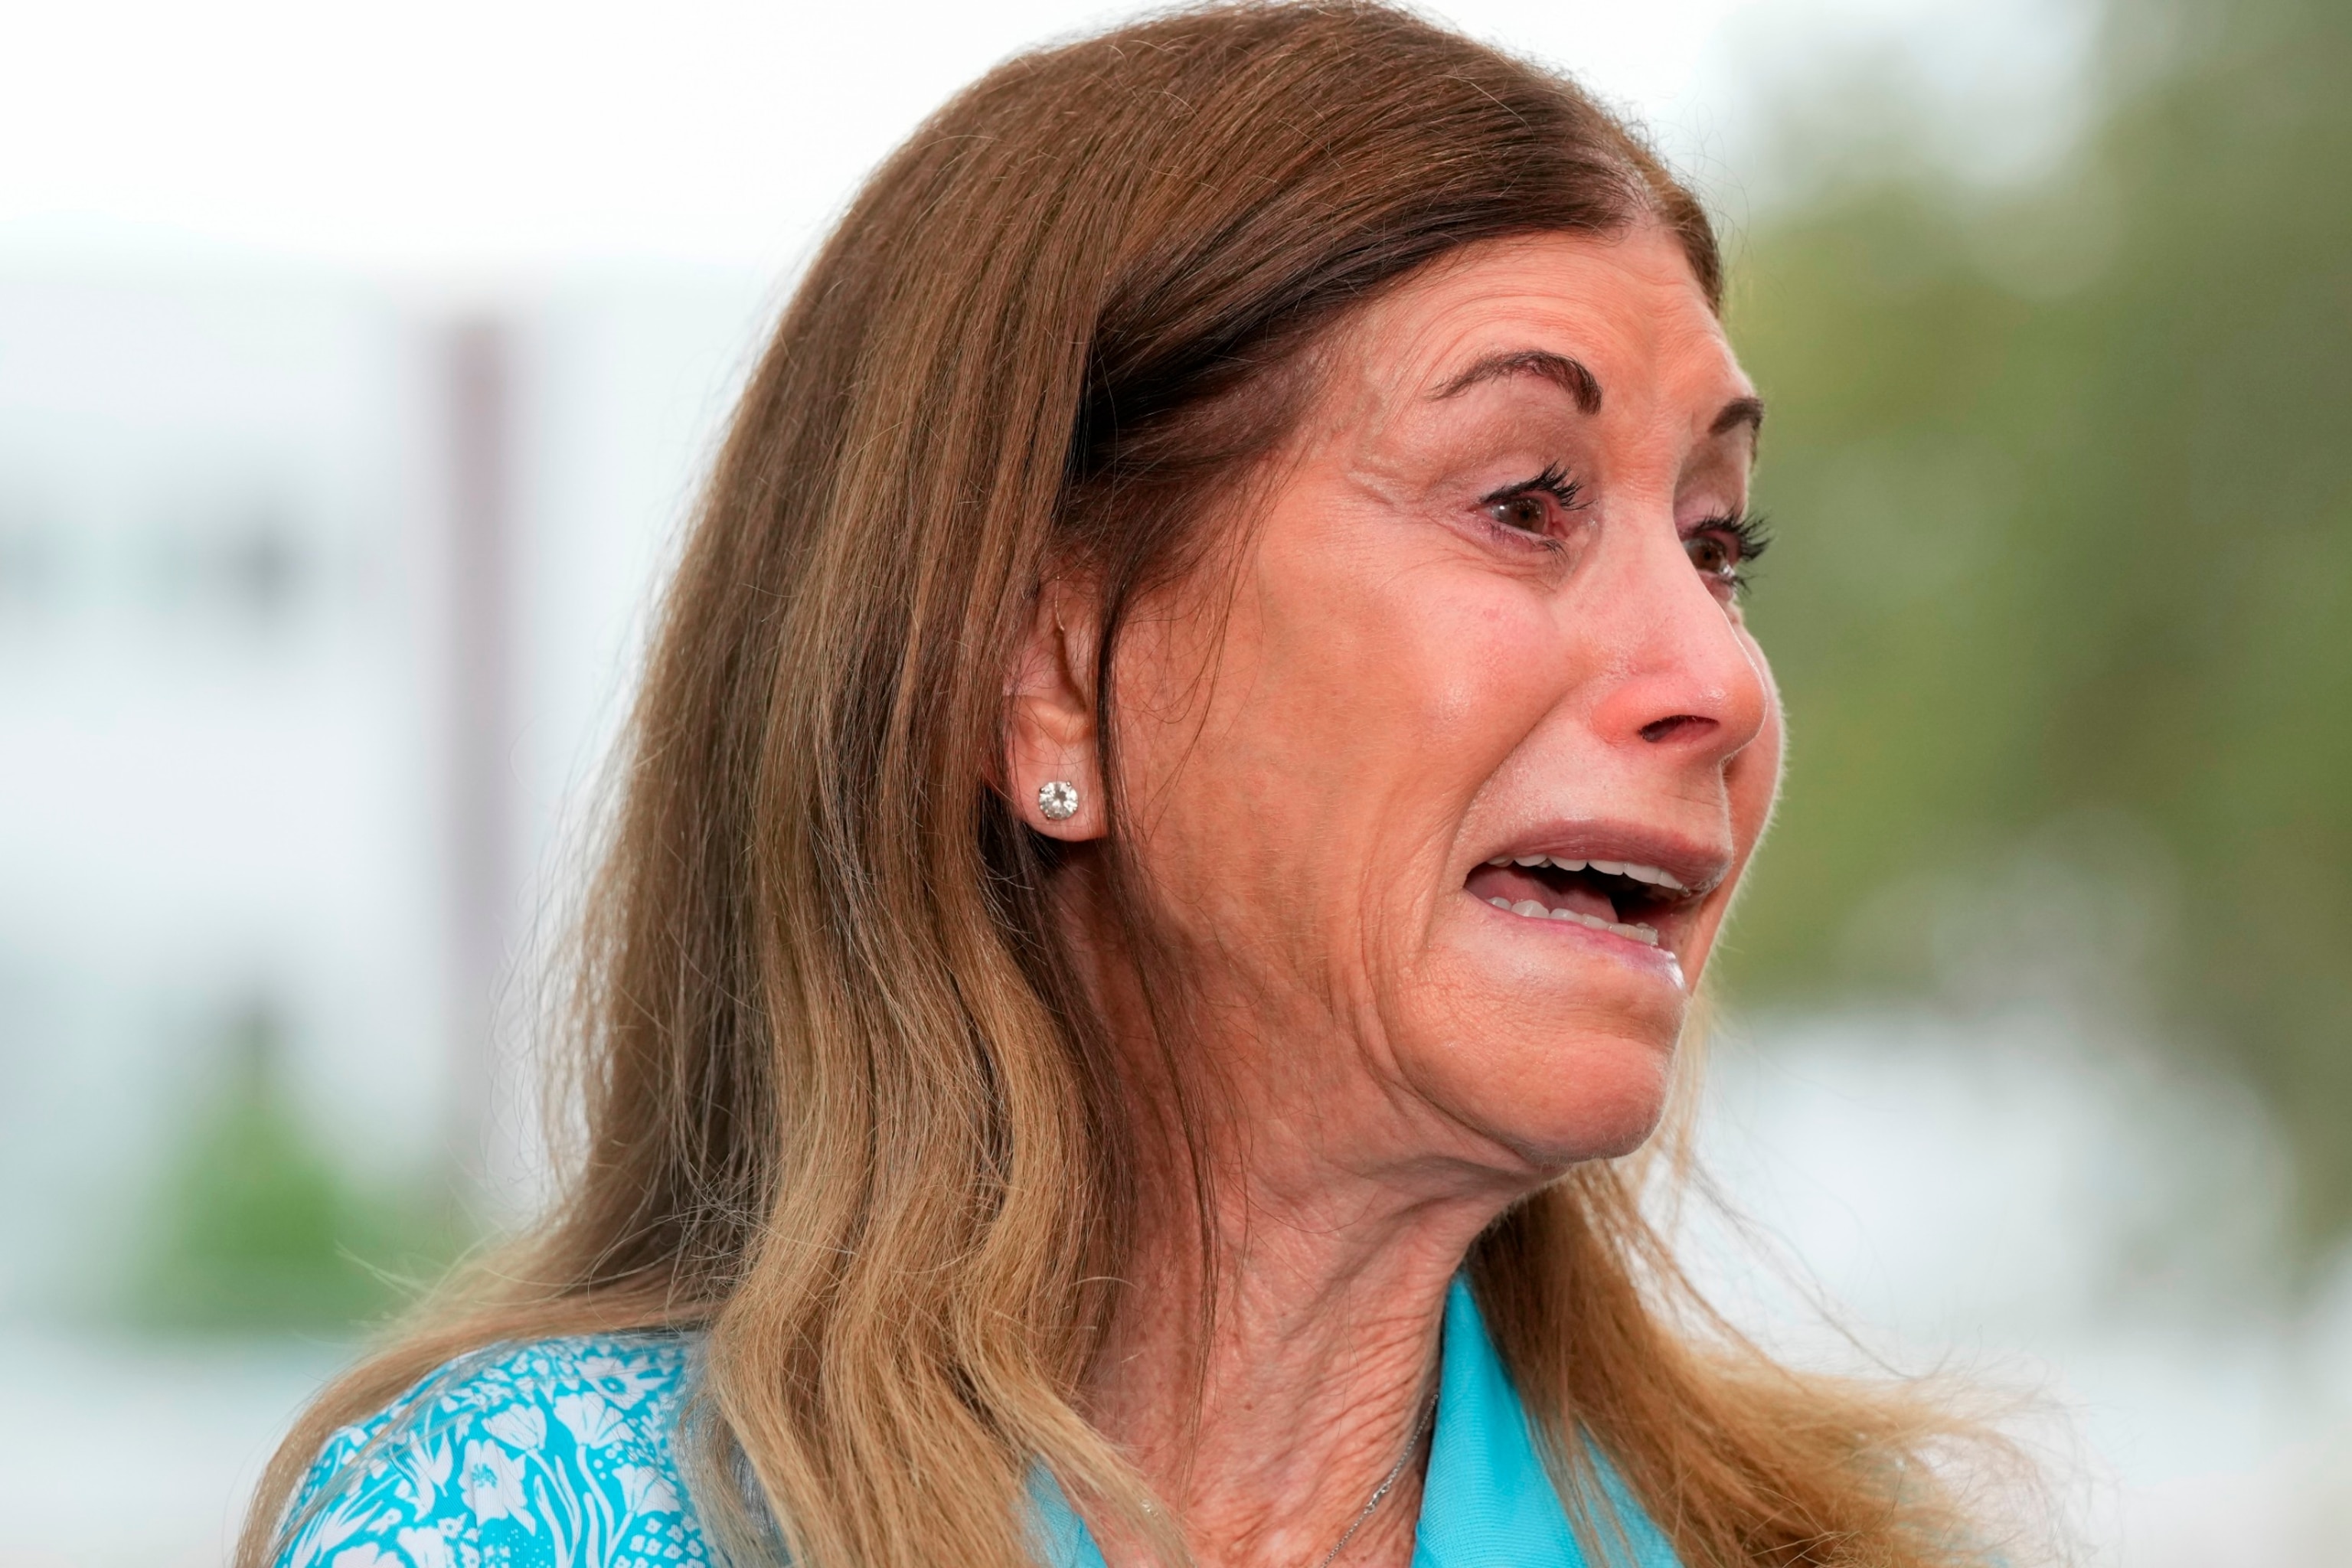 PHOTO: Linda Beigel Schulman is overcome with emotion as she talks to journalists about visiting the scene where her son and 16 others were killed in 2018 at Marjory Stoneman Douglas High School in Parkland, Fla., July 5, 2023.